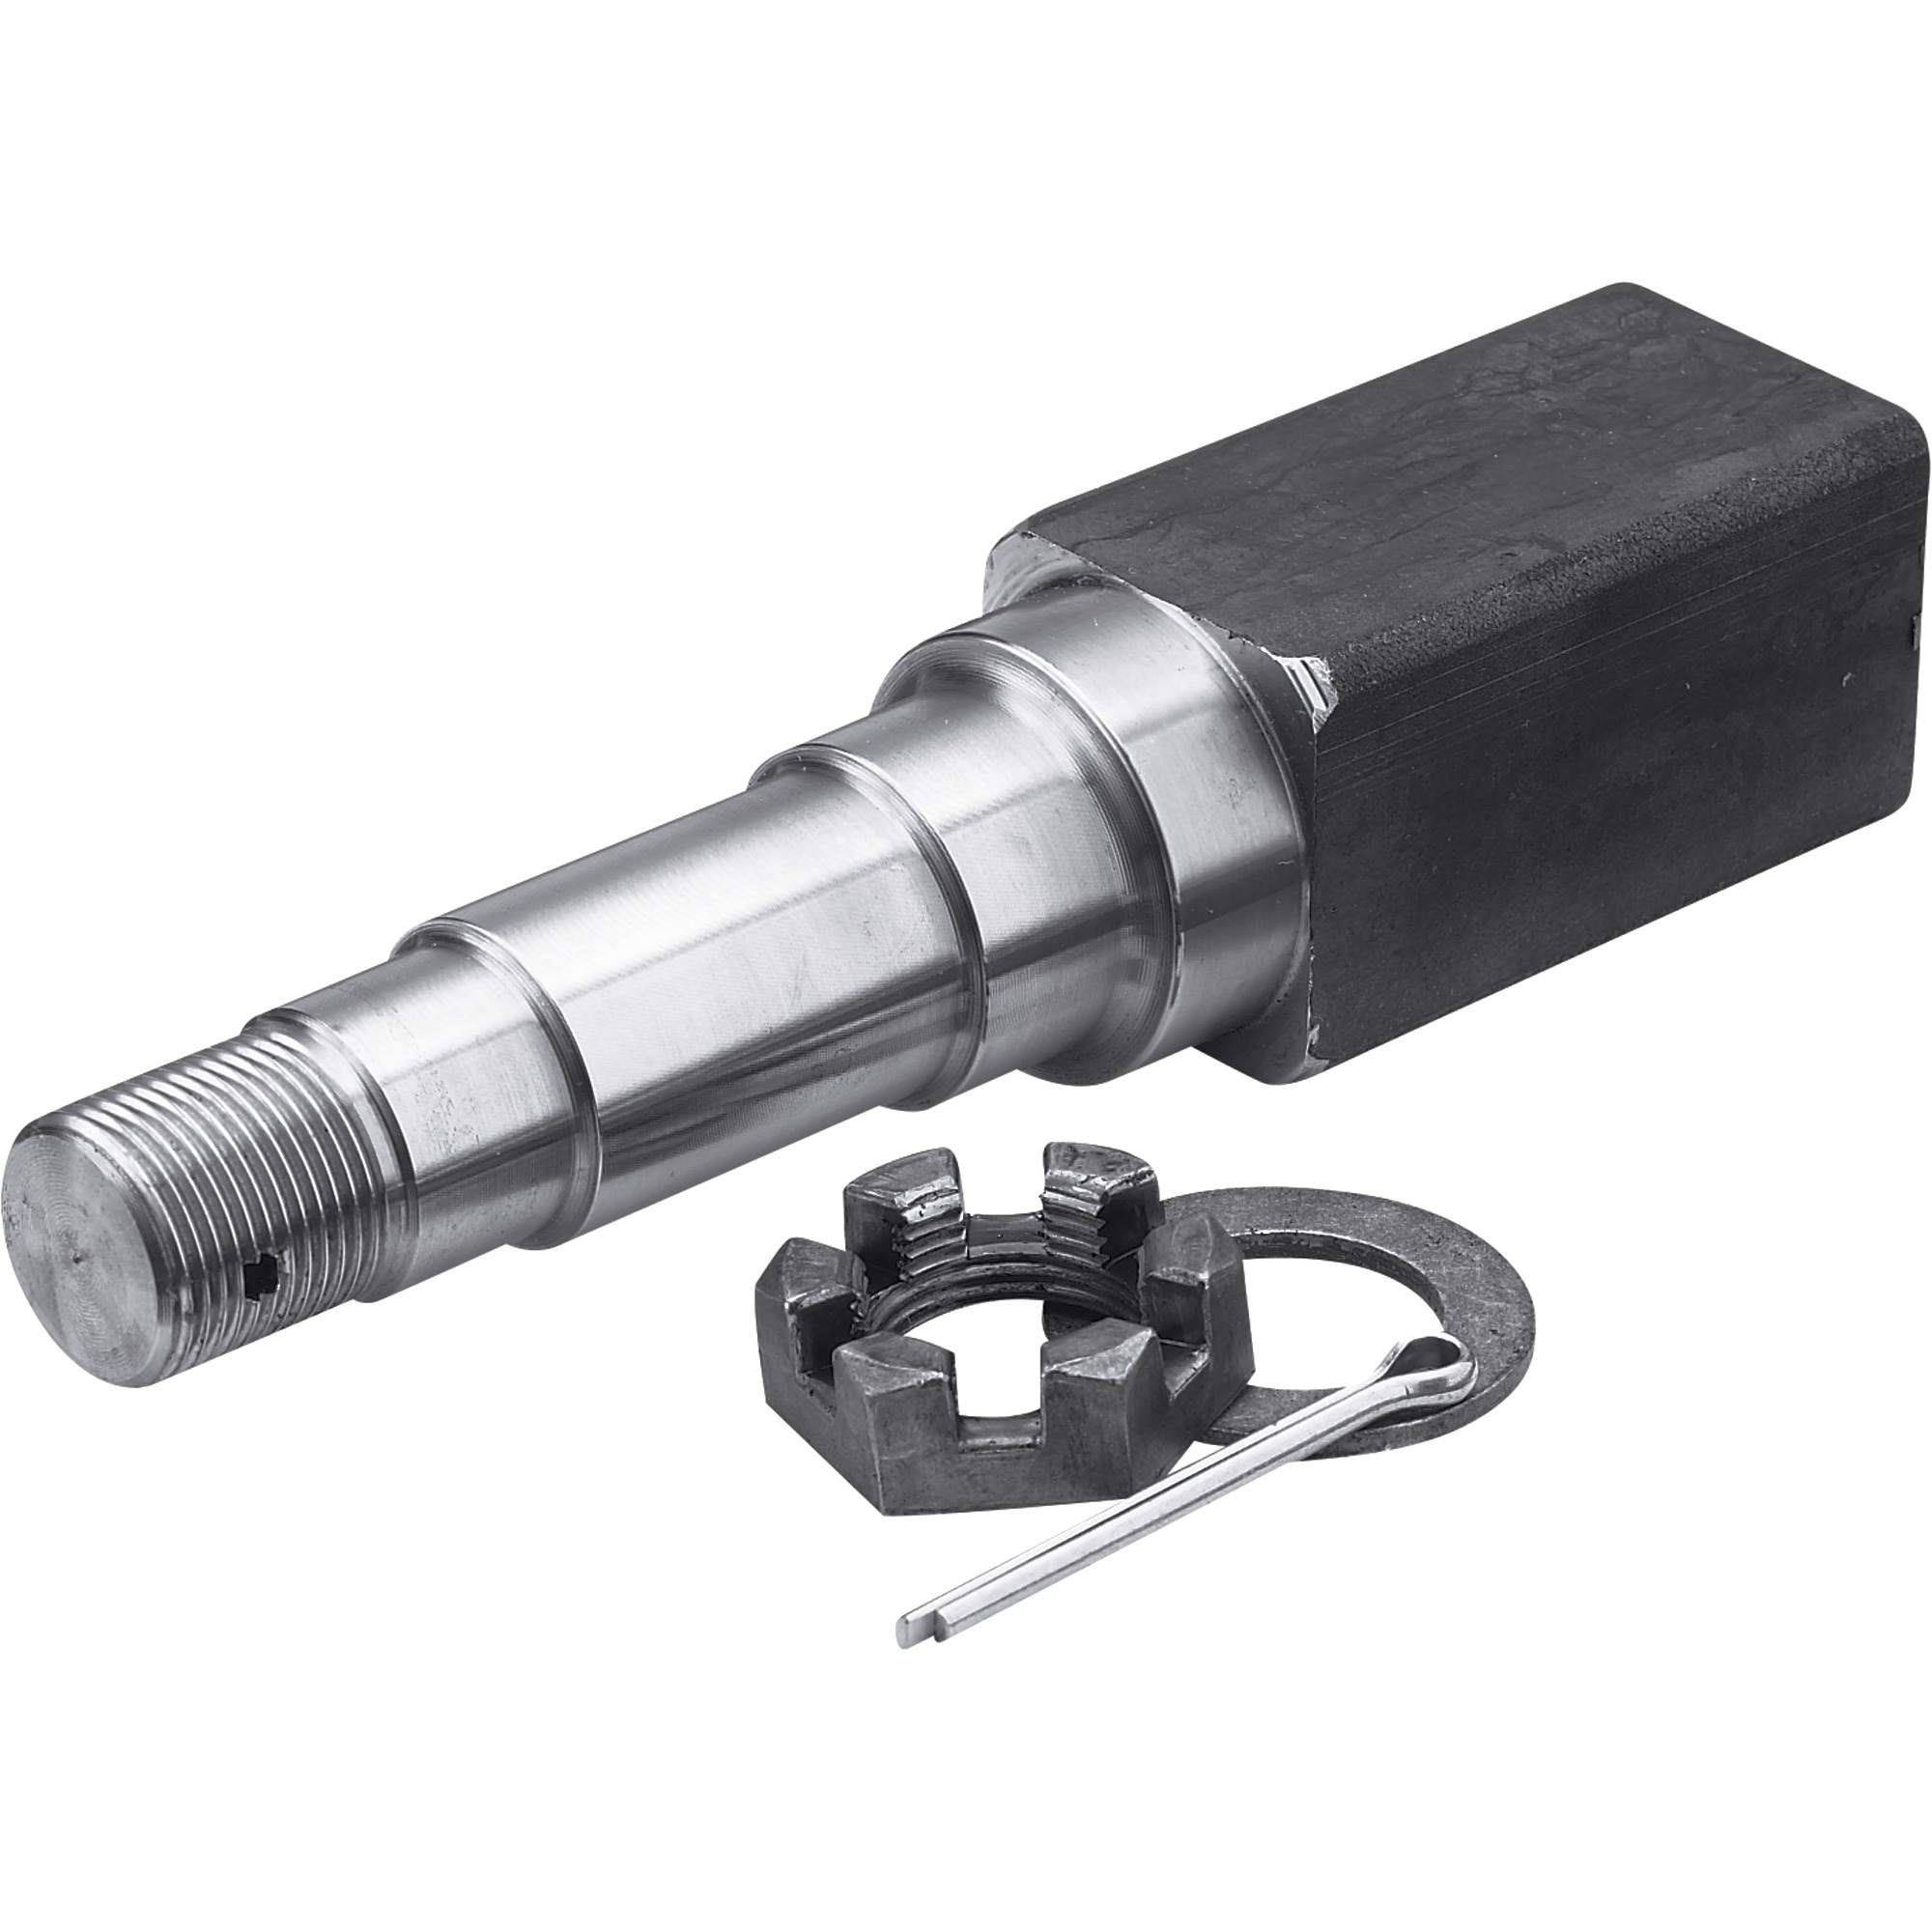 Ultra-Tow Axle Spindle â 1 3/4Inch Square, 8Inch Long, Single